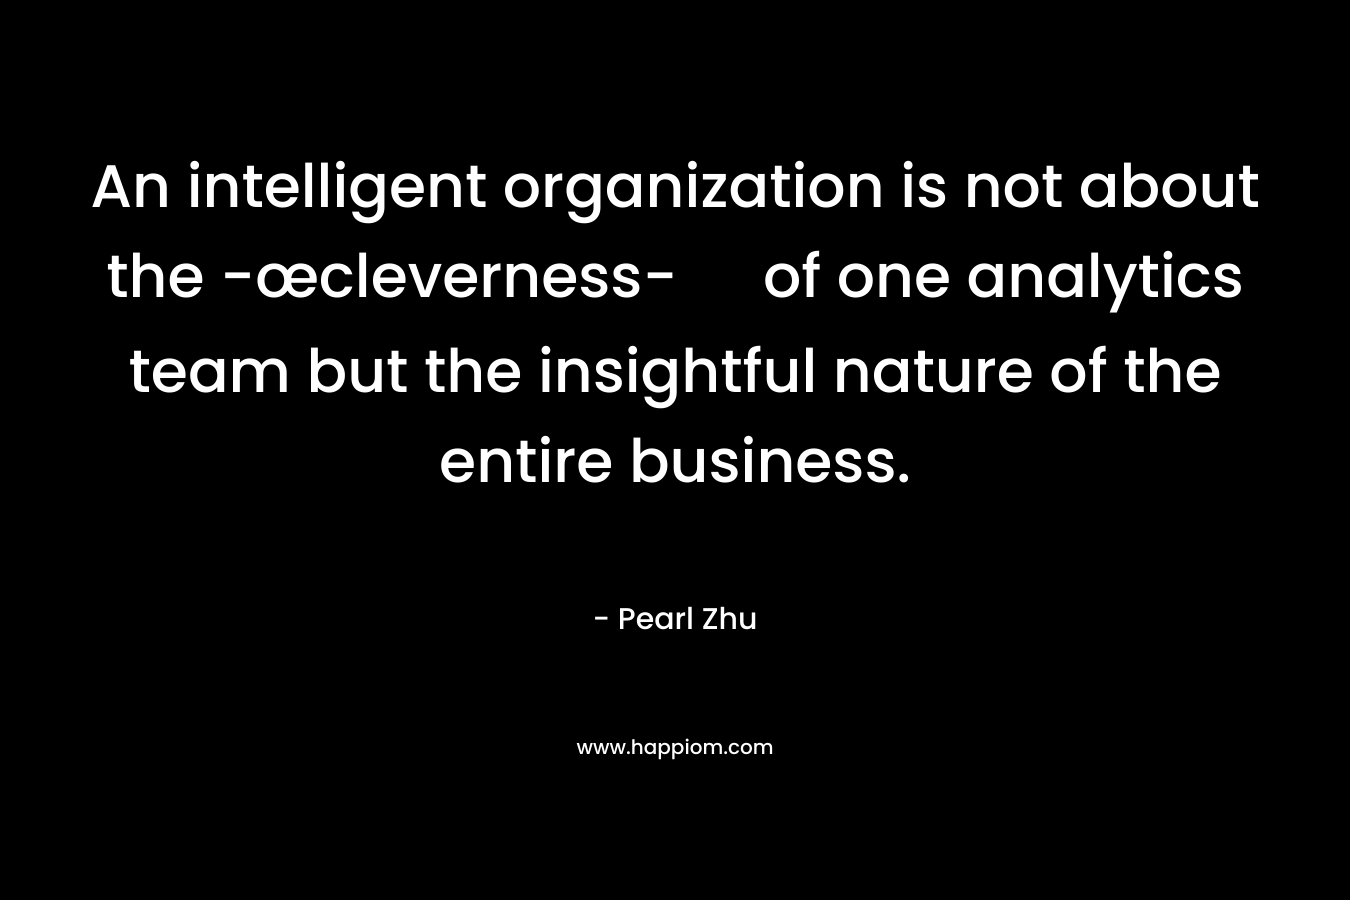 An intelligent organization is not about the -œcleverness- of one analytics team but the insightful nature of the entire business.